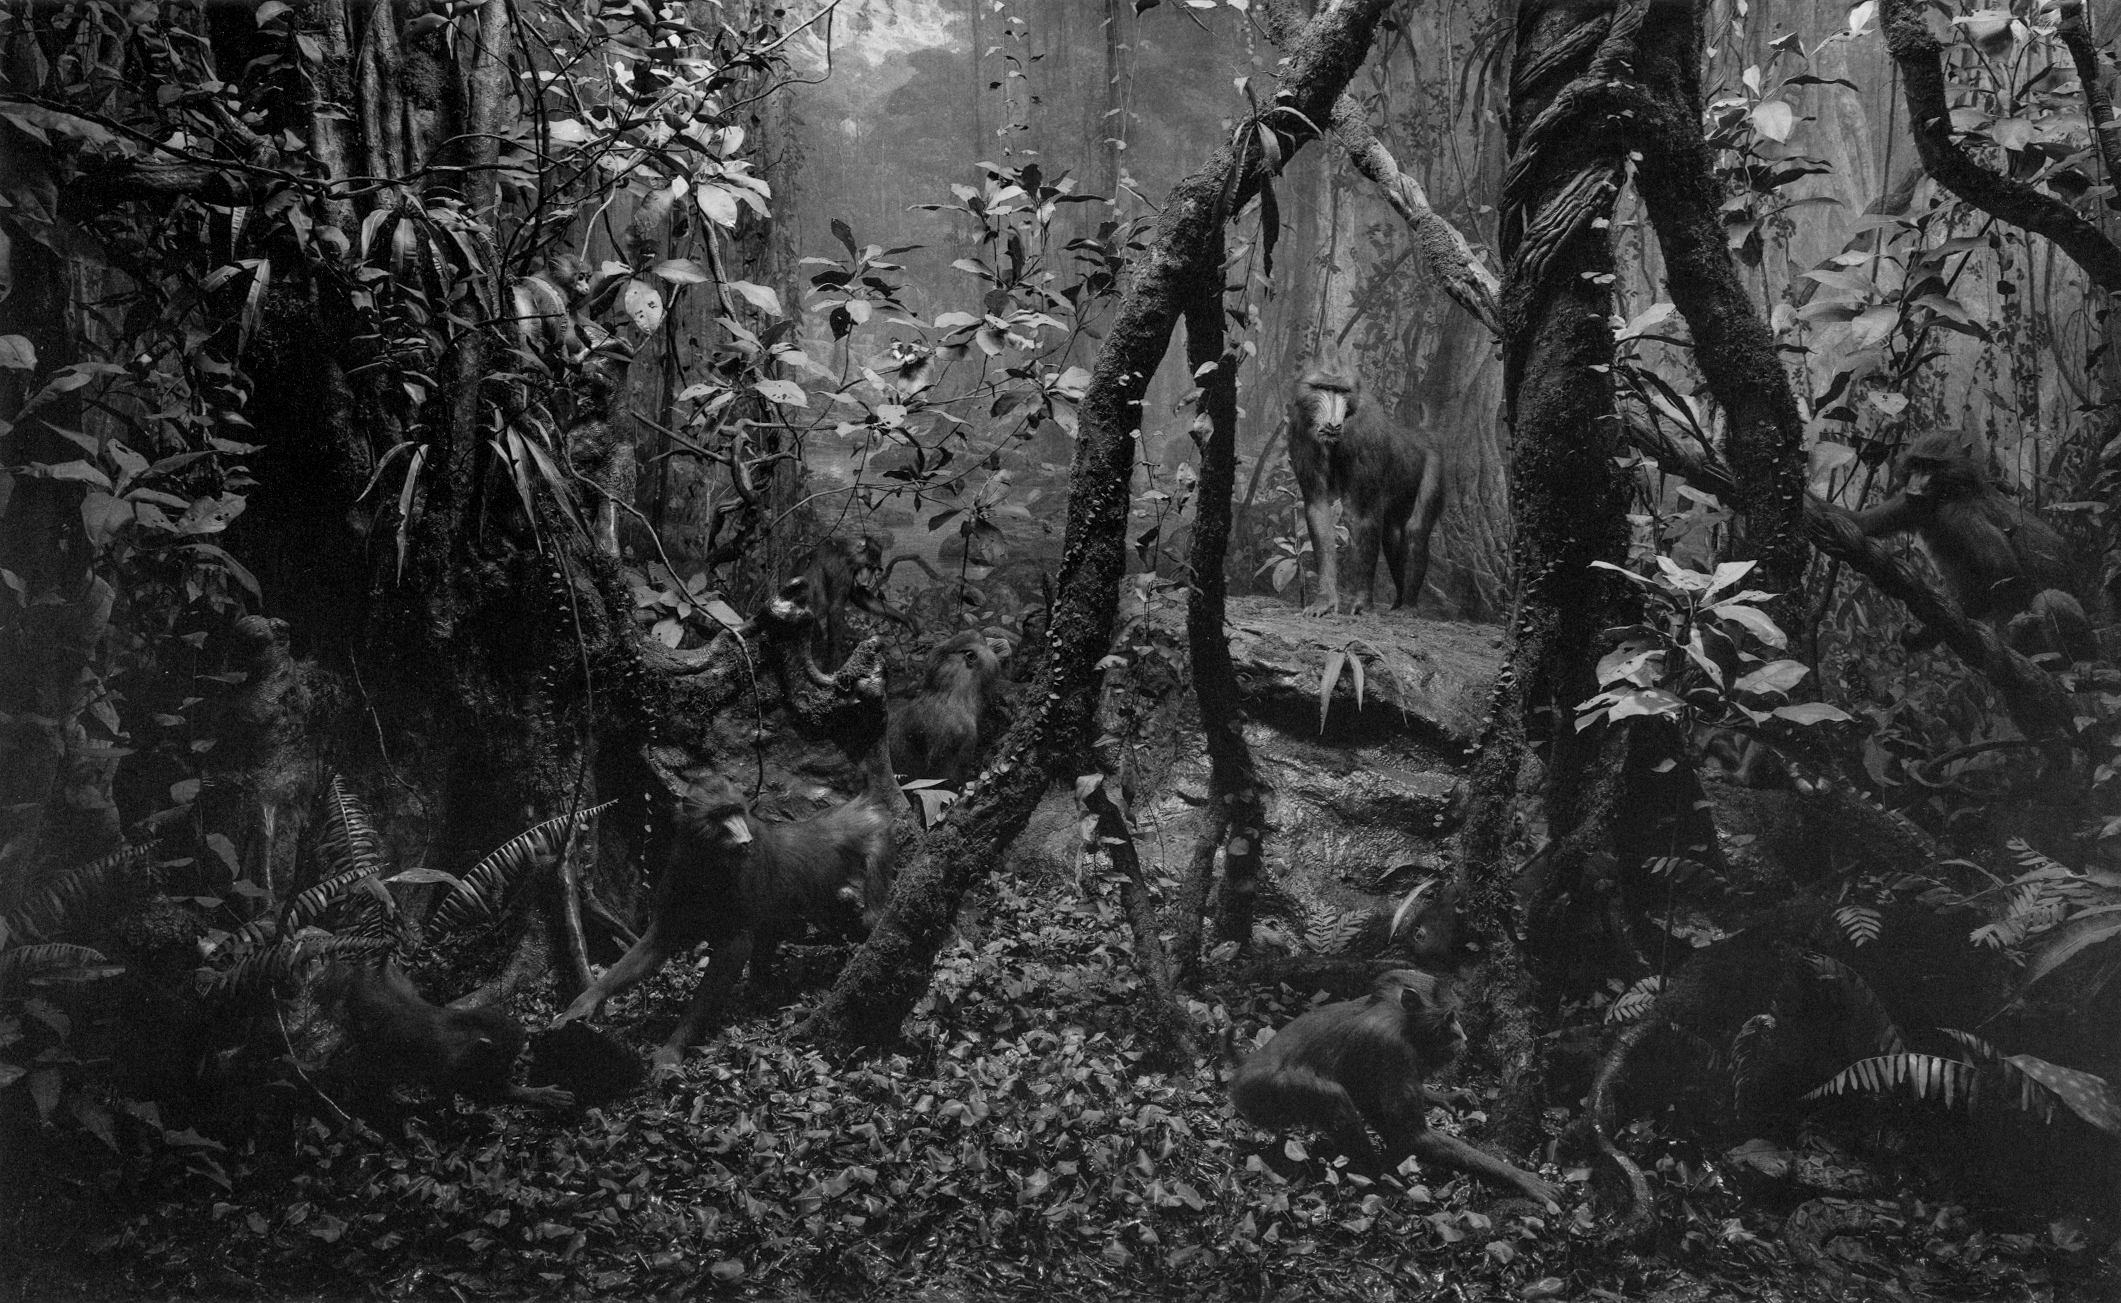 Black and white photograph of a diorama depicting apes foraging in the forest